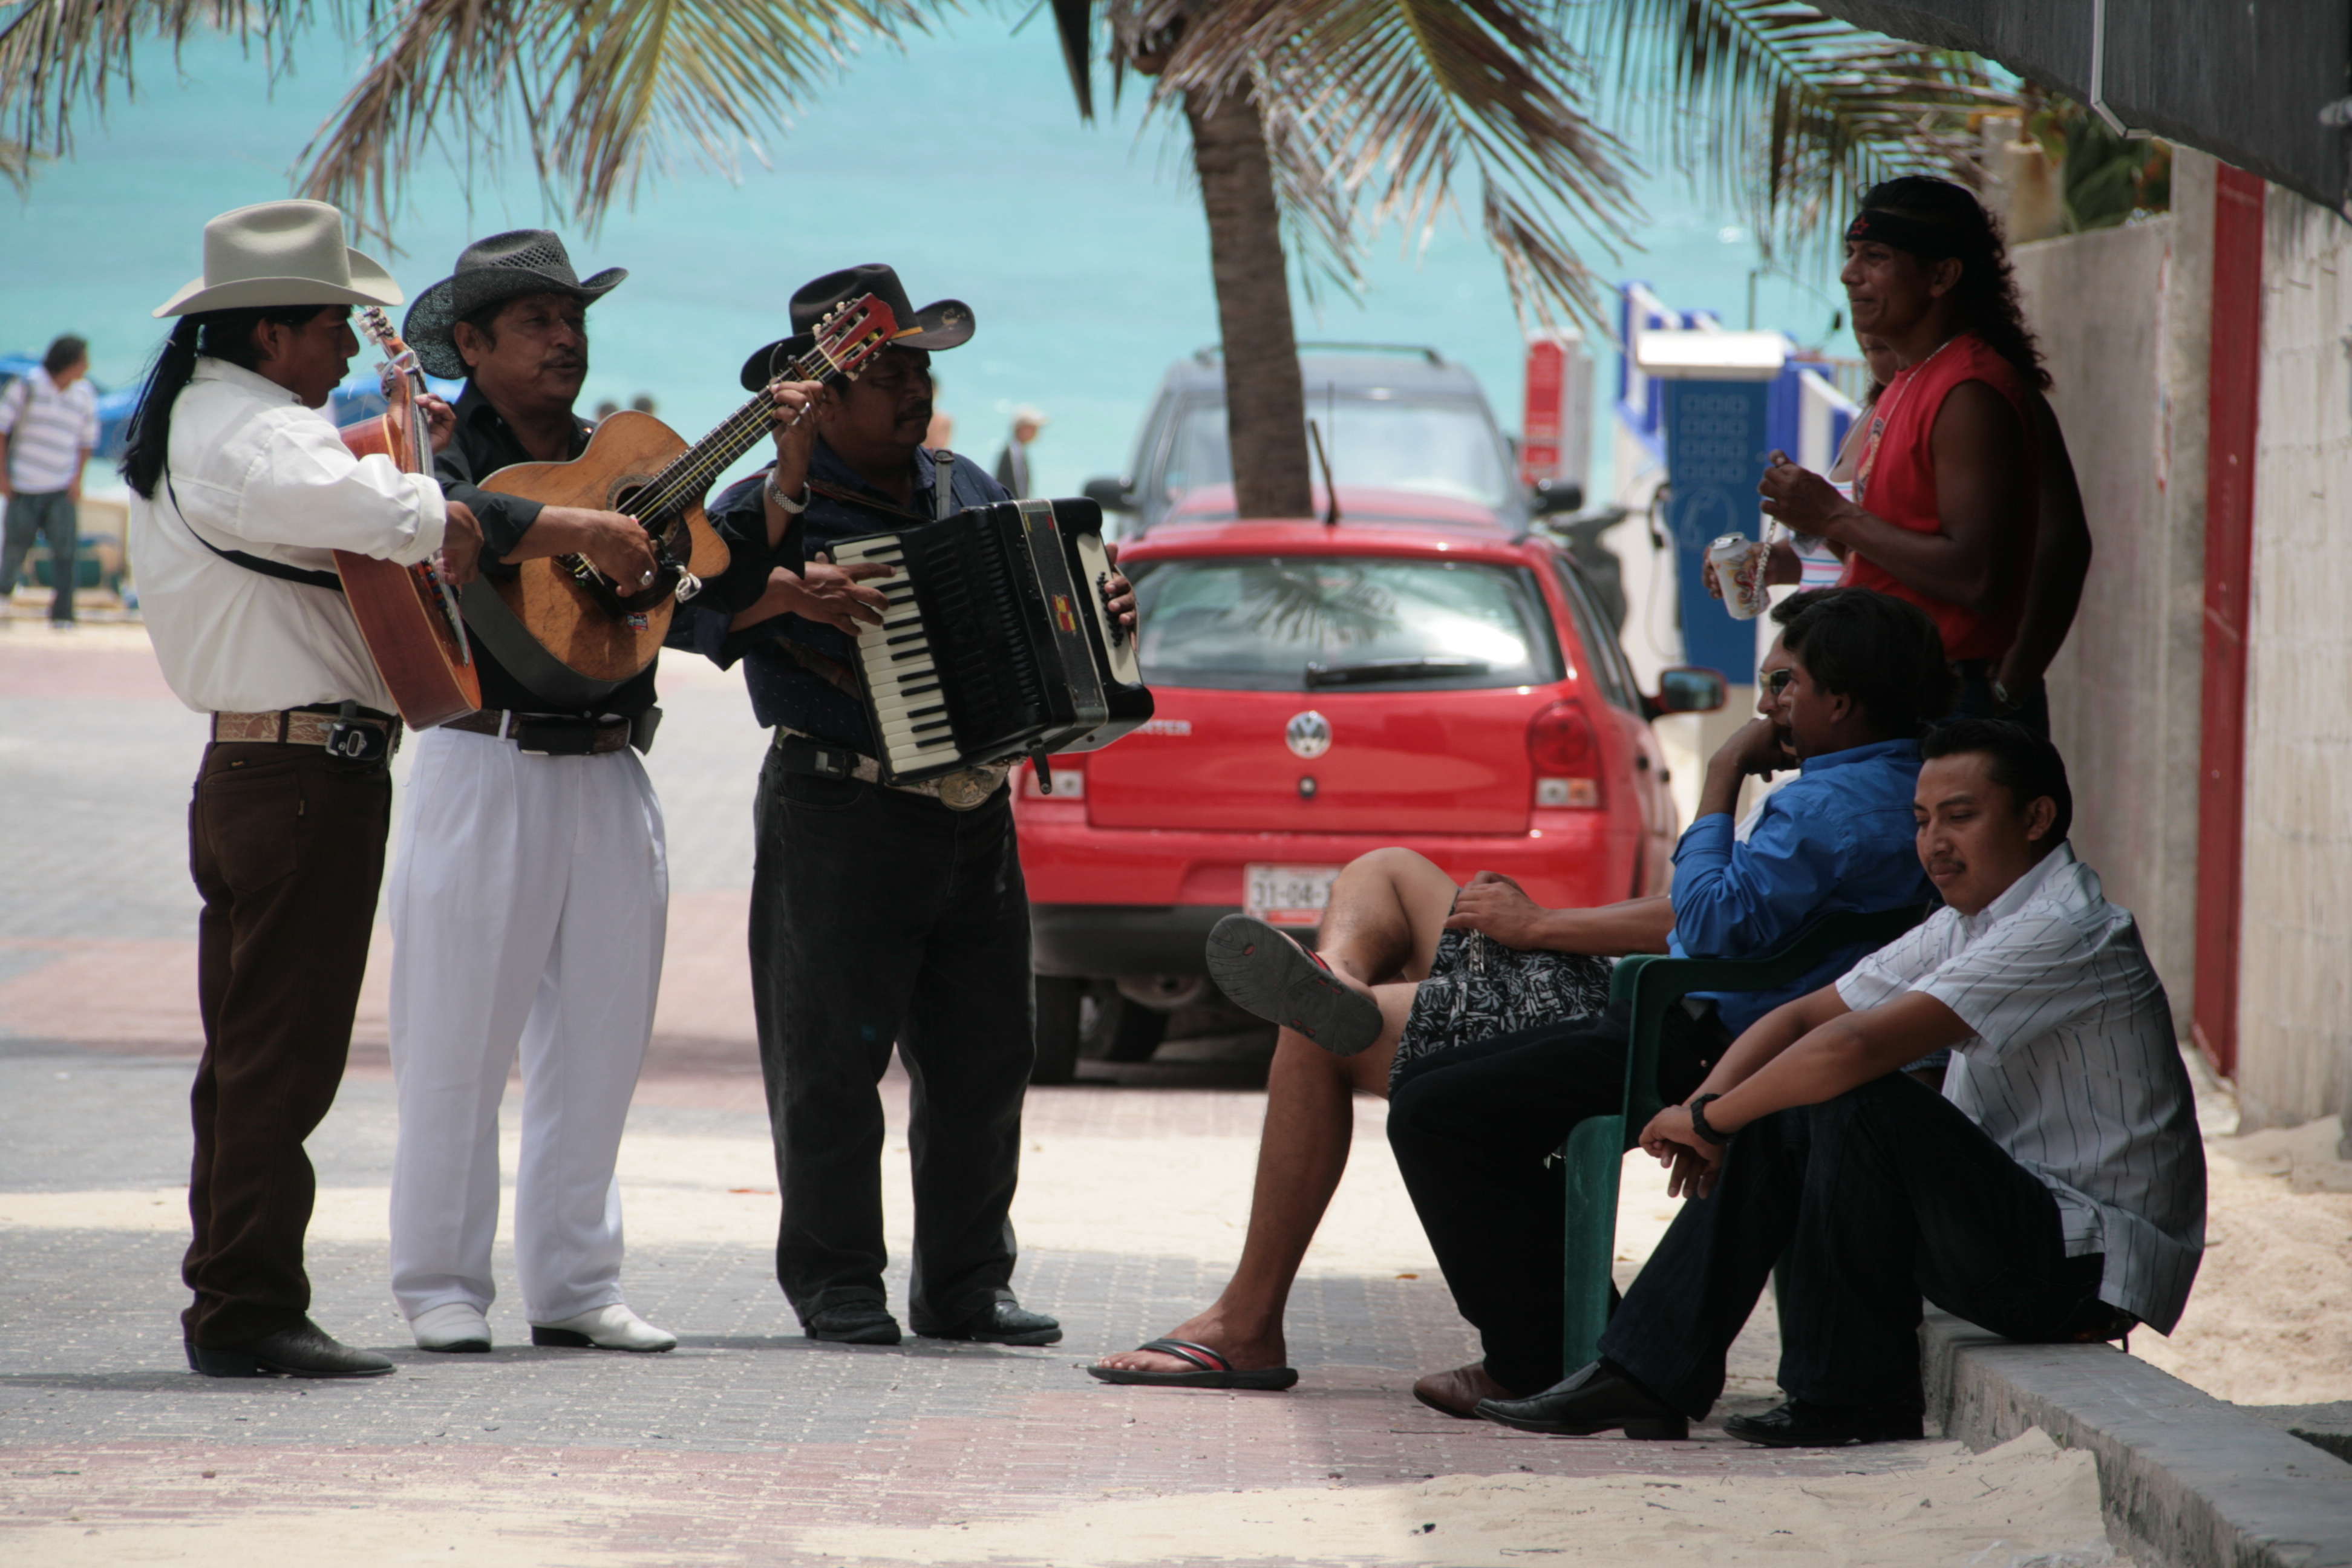 Despite of being a touristically affected city, in Playa del Carmen autentic Mariachis can be seen on every street. 